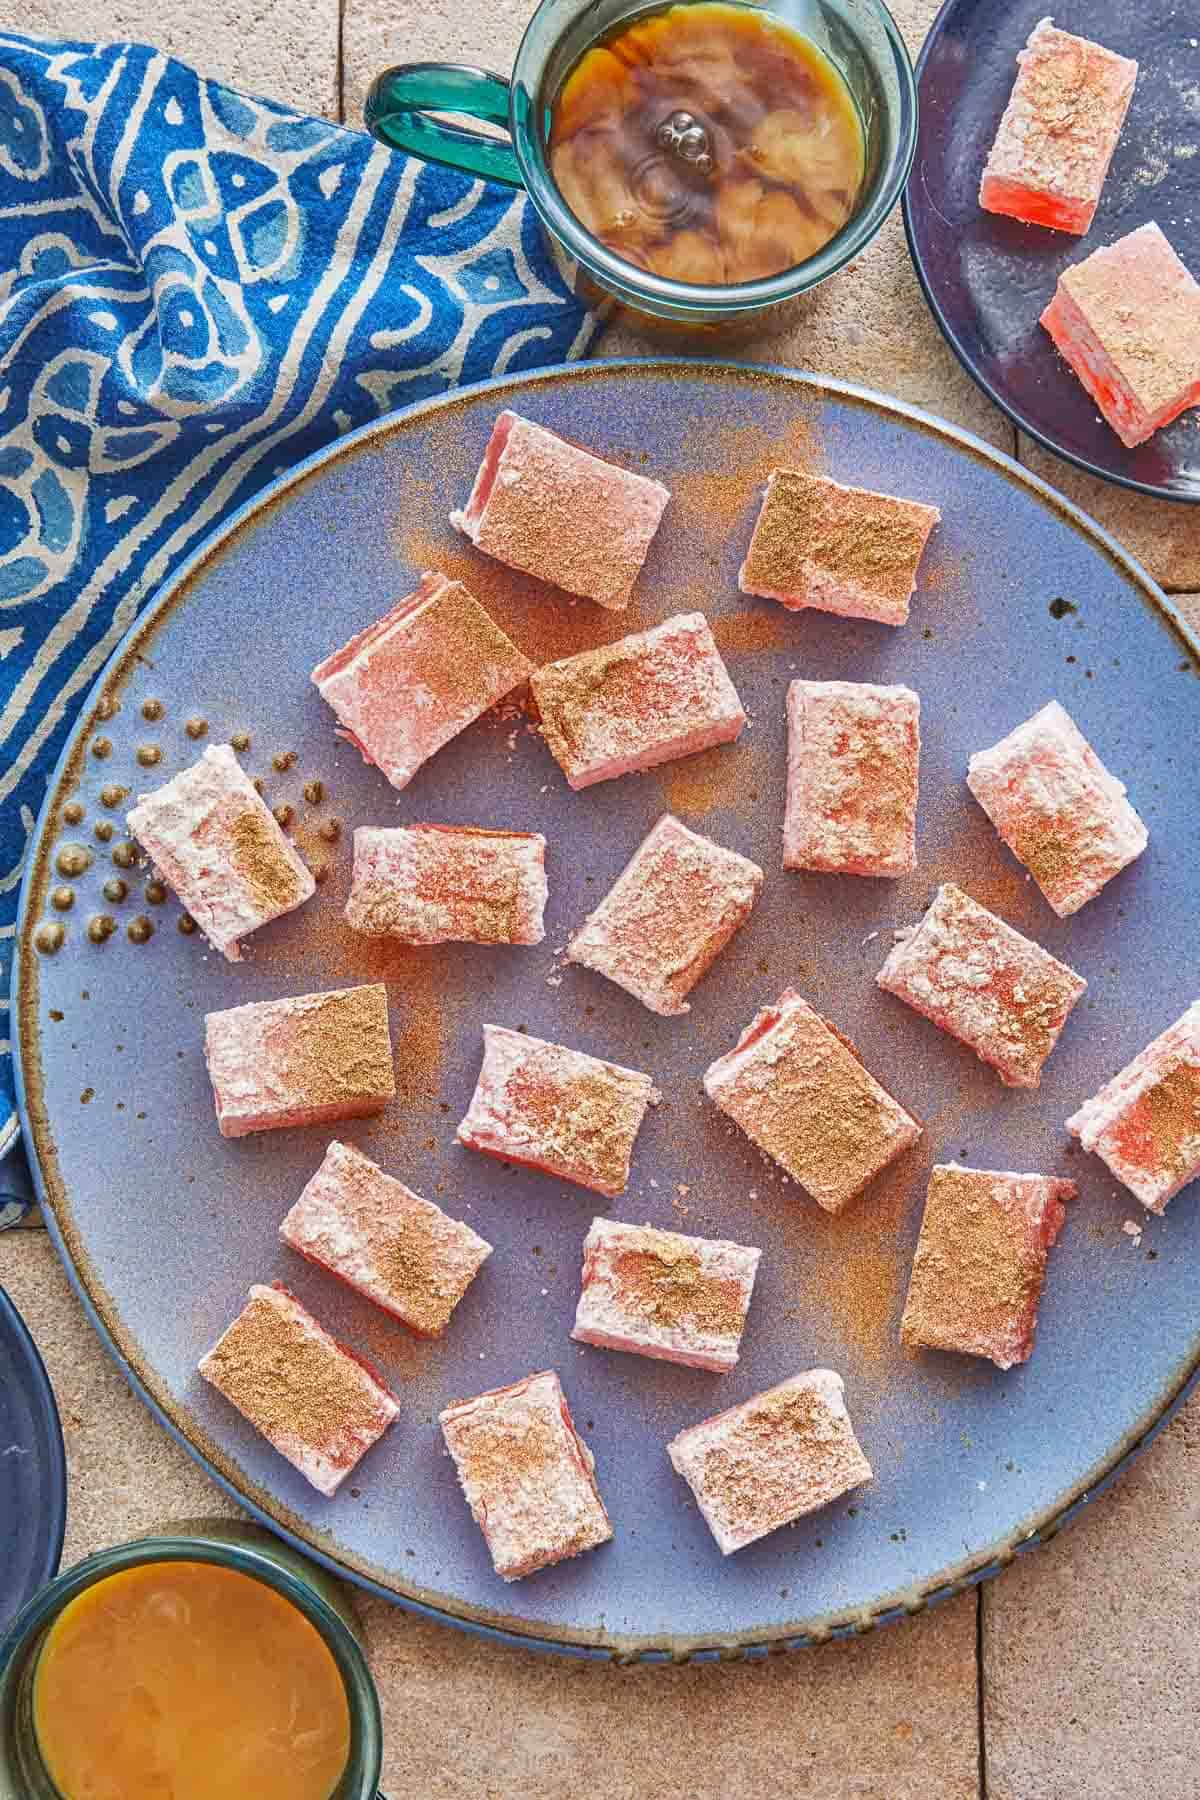 pieces of turkish delight (lokum) on a serving platter with a cup of coffee.